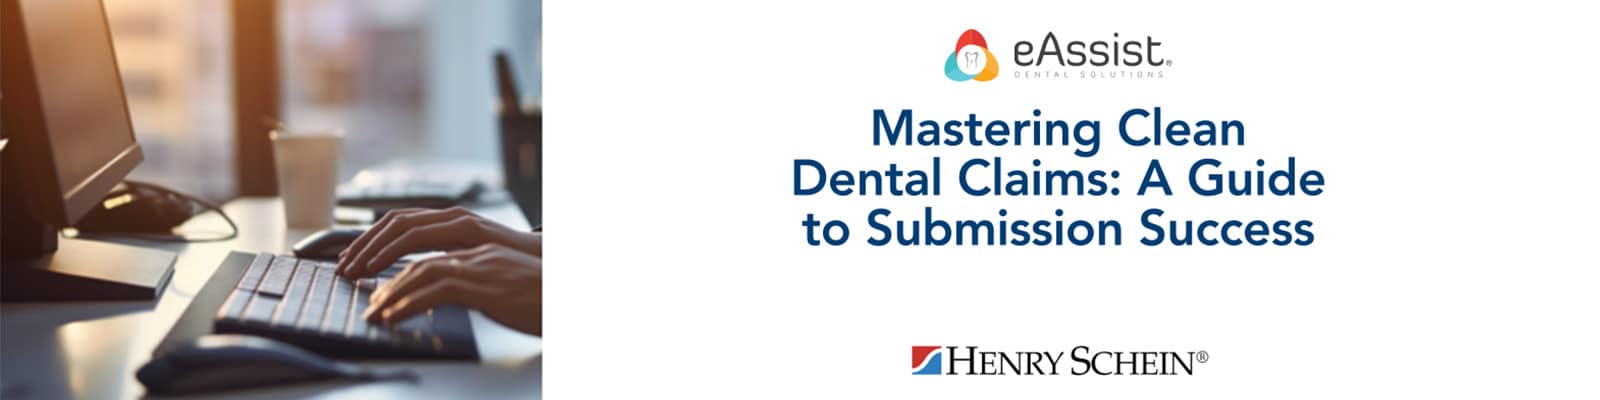 Mastering Clean Dental Claims: A Guide to Submission Success